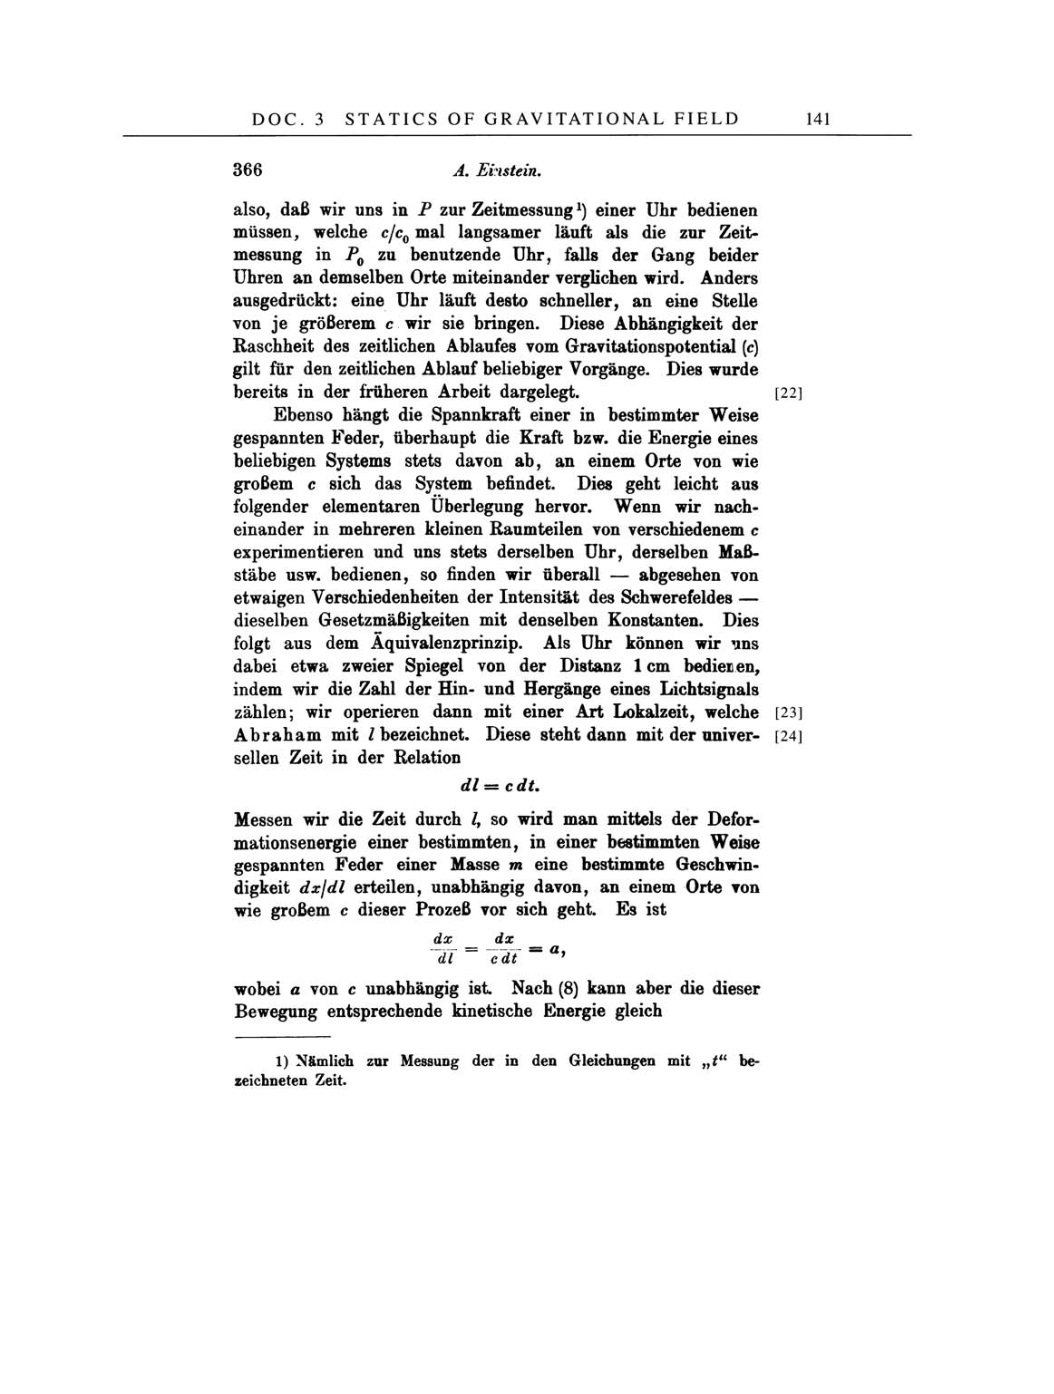 Volume 4: The Swiss Years: Writings 1912-1914 page 141